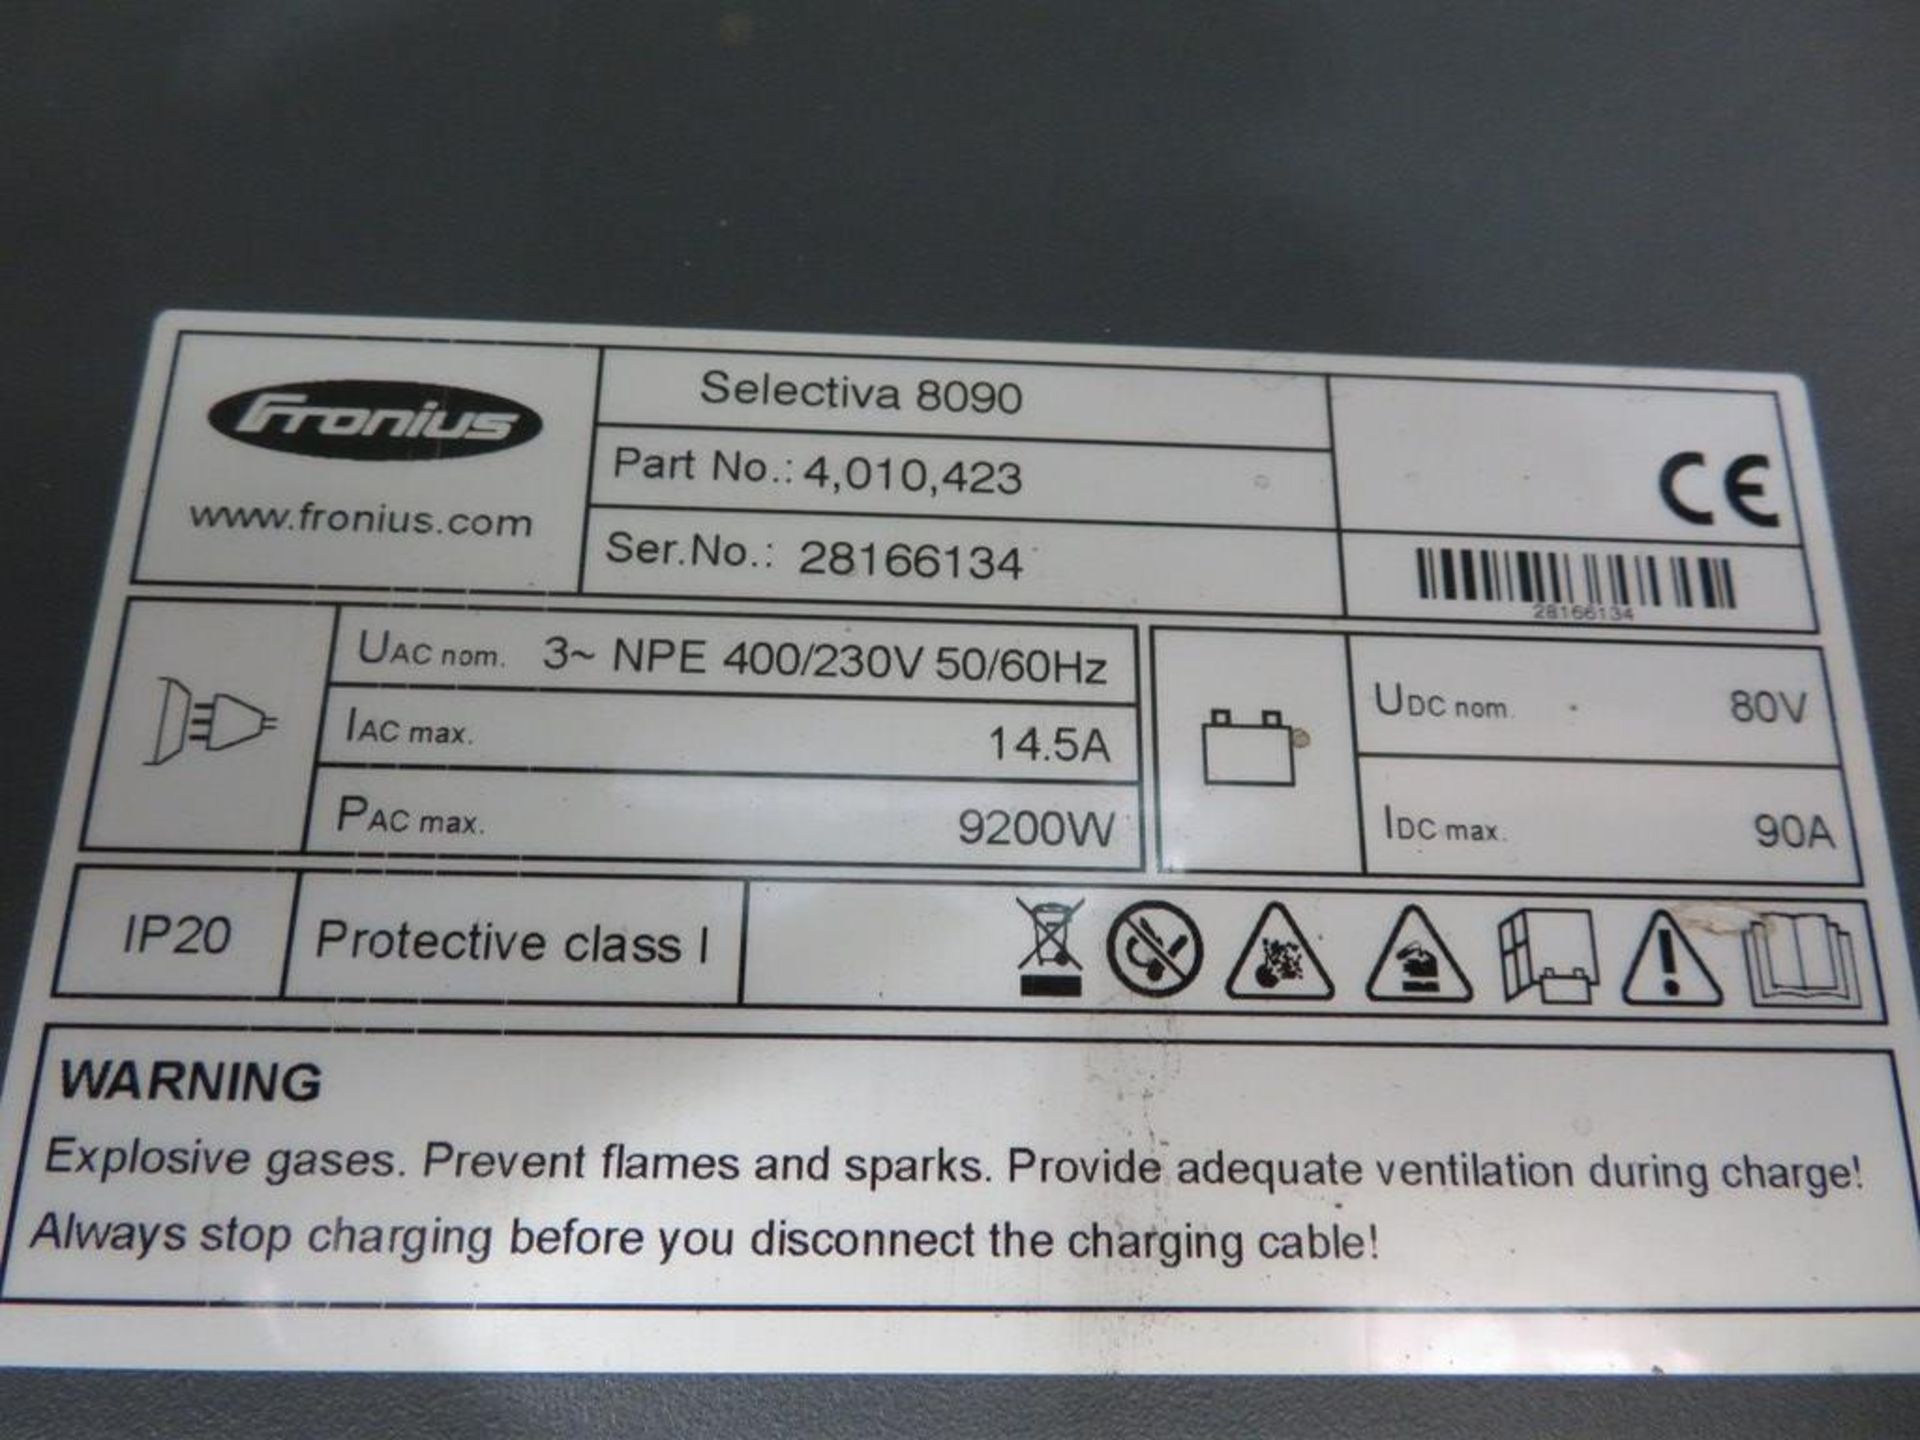 FRONIUS SELECTIVA 8090 8KW - 80V BATTERY CHARGER; SERIAL NO 28166134 - Image 2 of 2